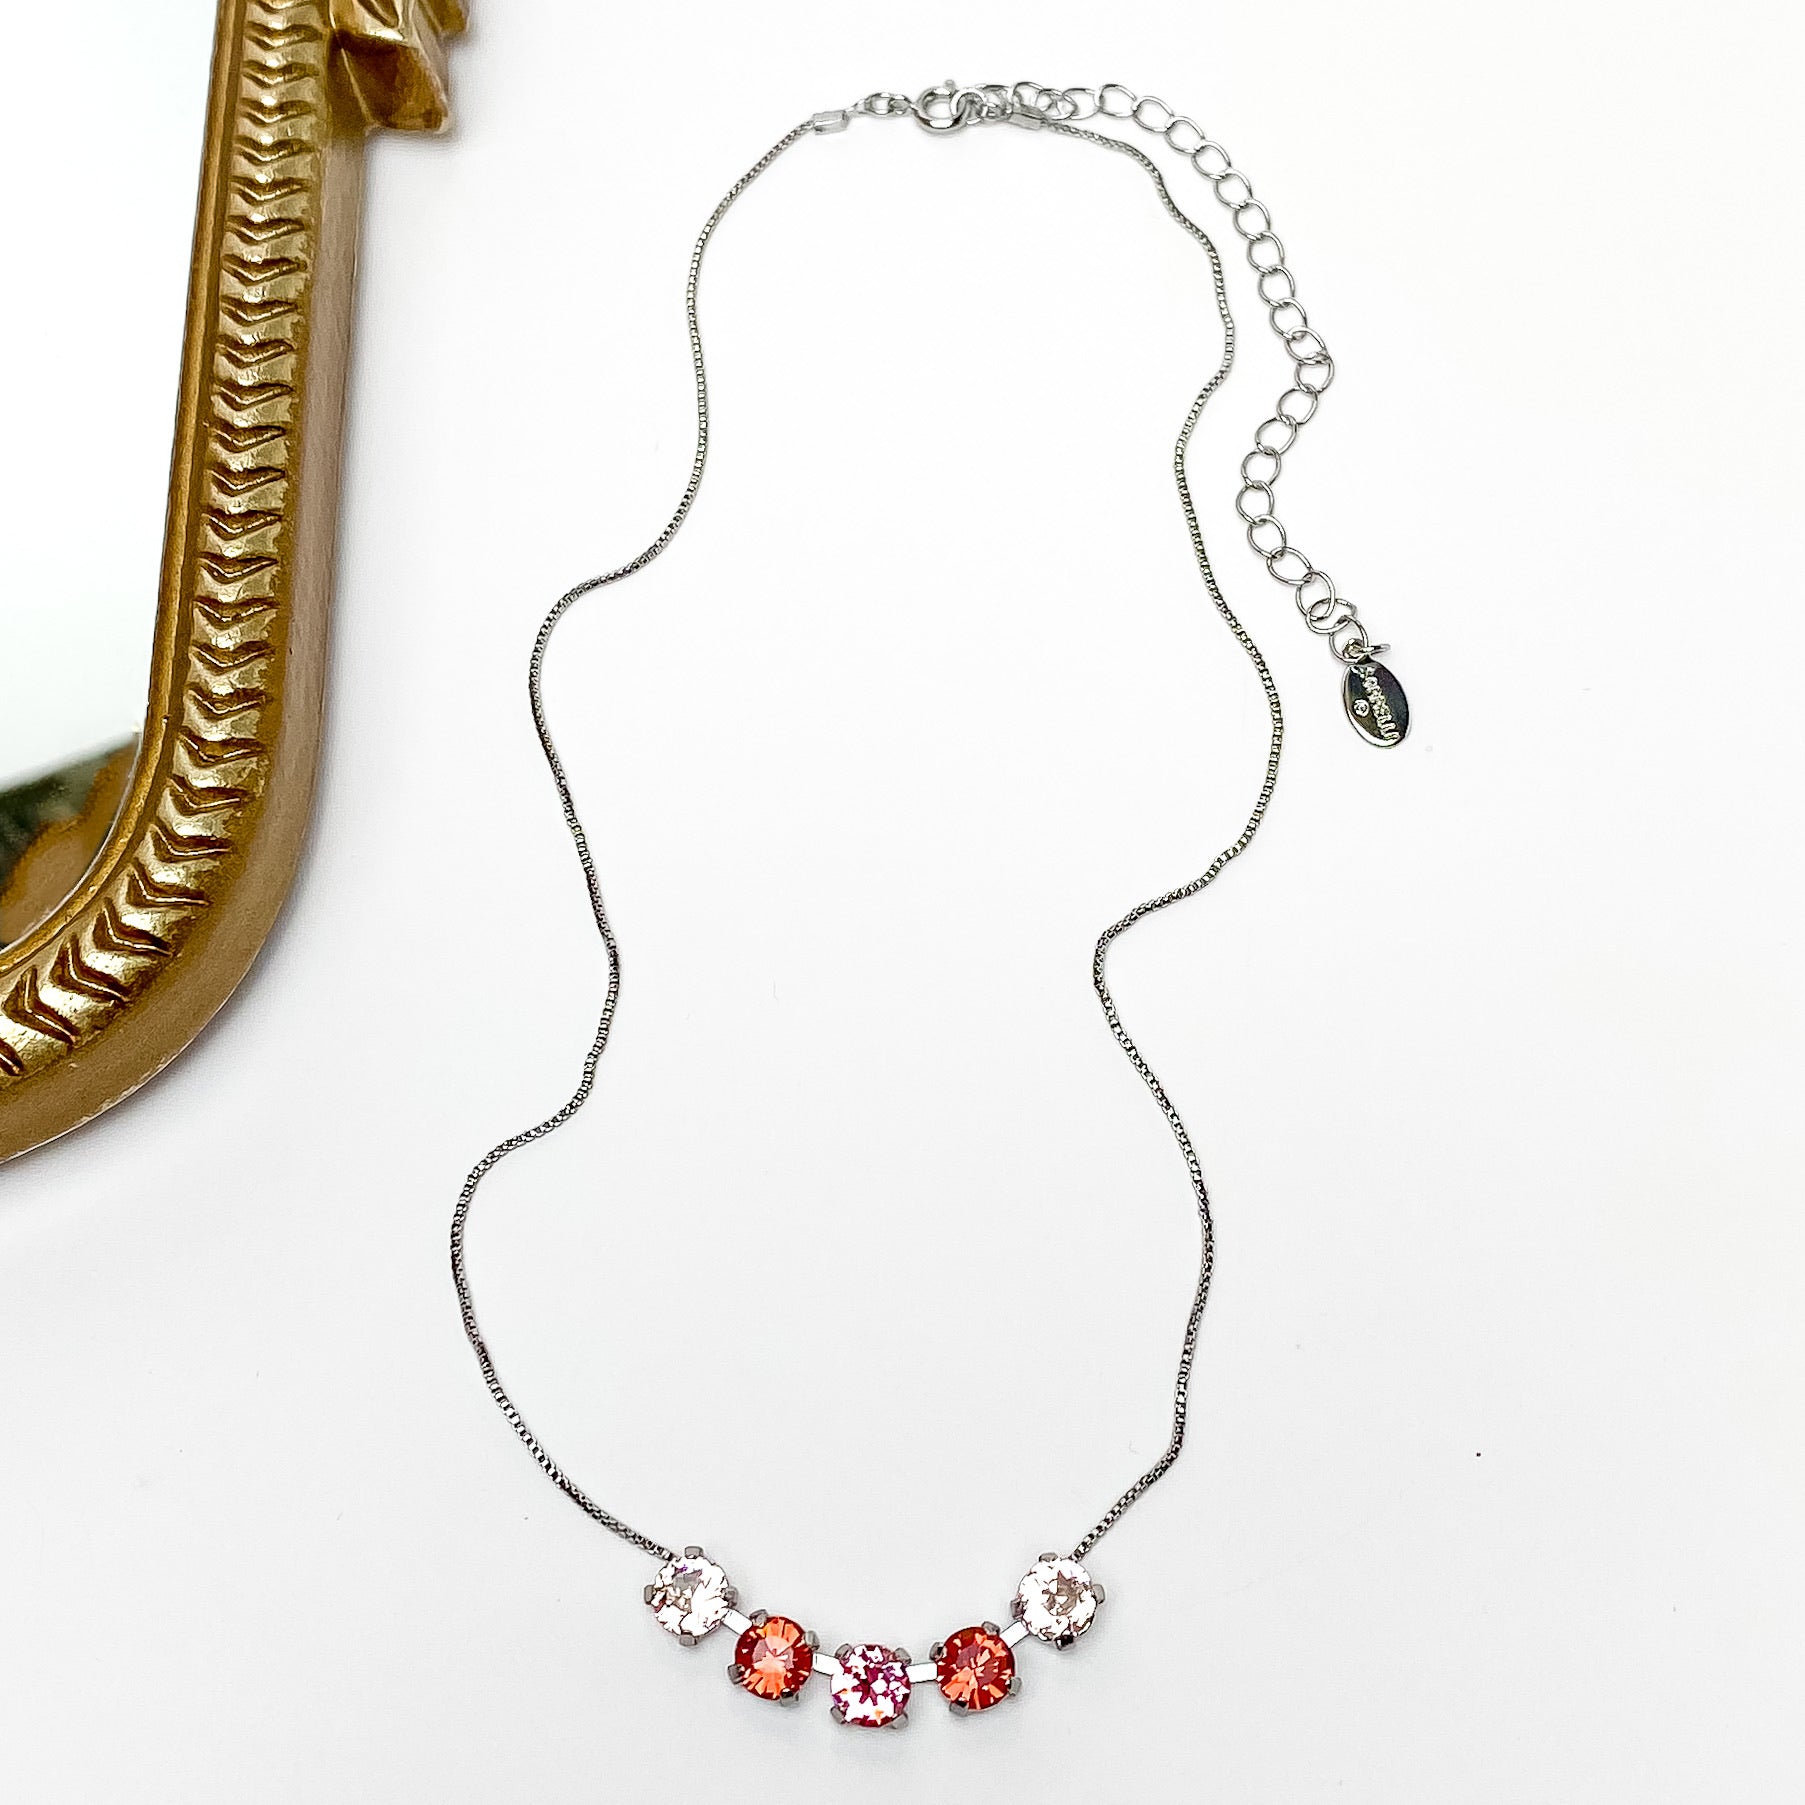 Pictured is a silver necklace with a five crystals. The center crystal is pink, the next one on each side is red, and finally the last two are a light champagne colored crystal. This necklace is pictured on a white background with a gold mirror on the left side.